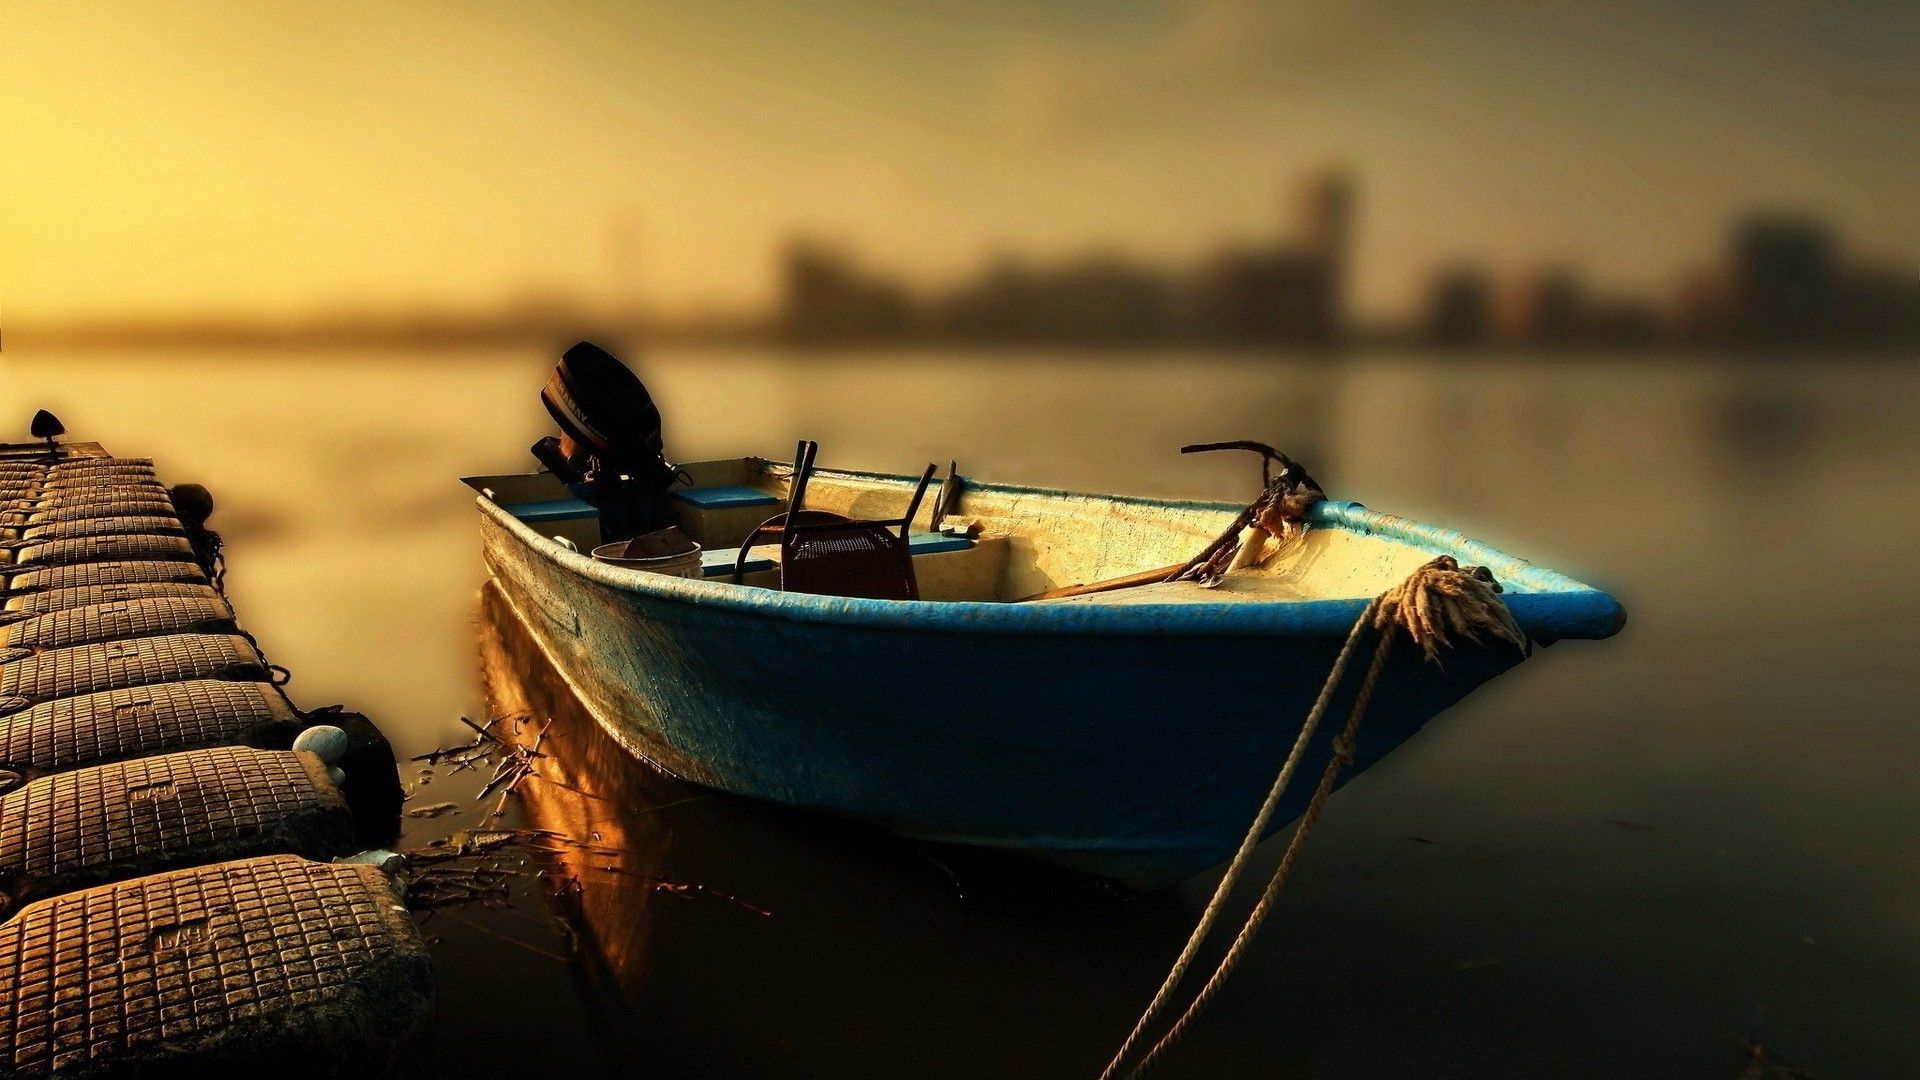 Fishing Boats Desktop Wallpaper, Pictures of Fishing Boats, New ...